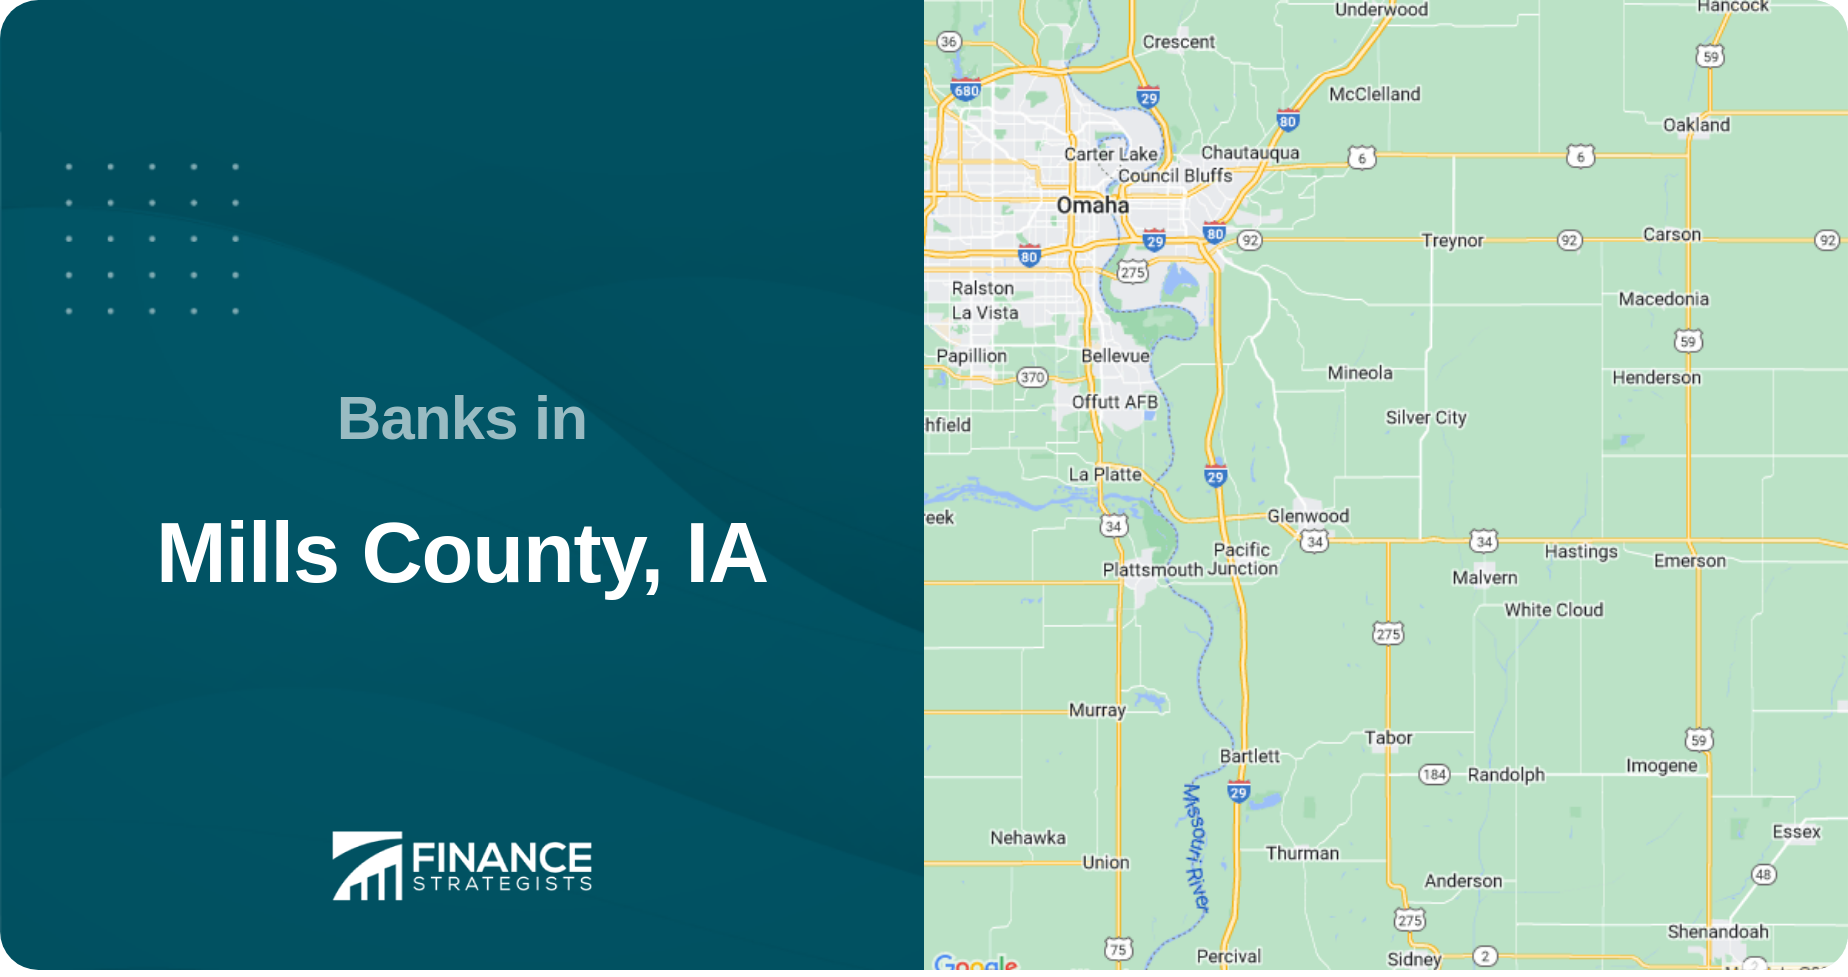 Banks in Mills County, IA